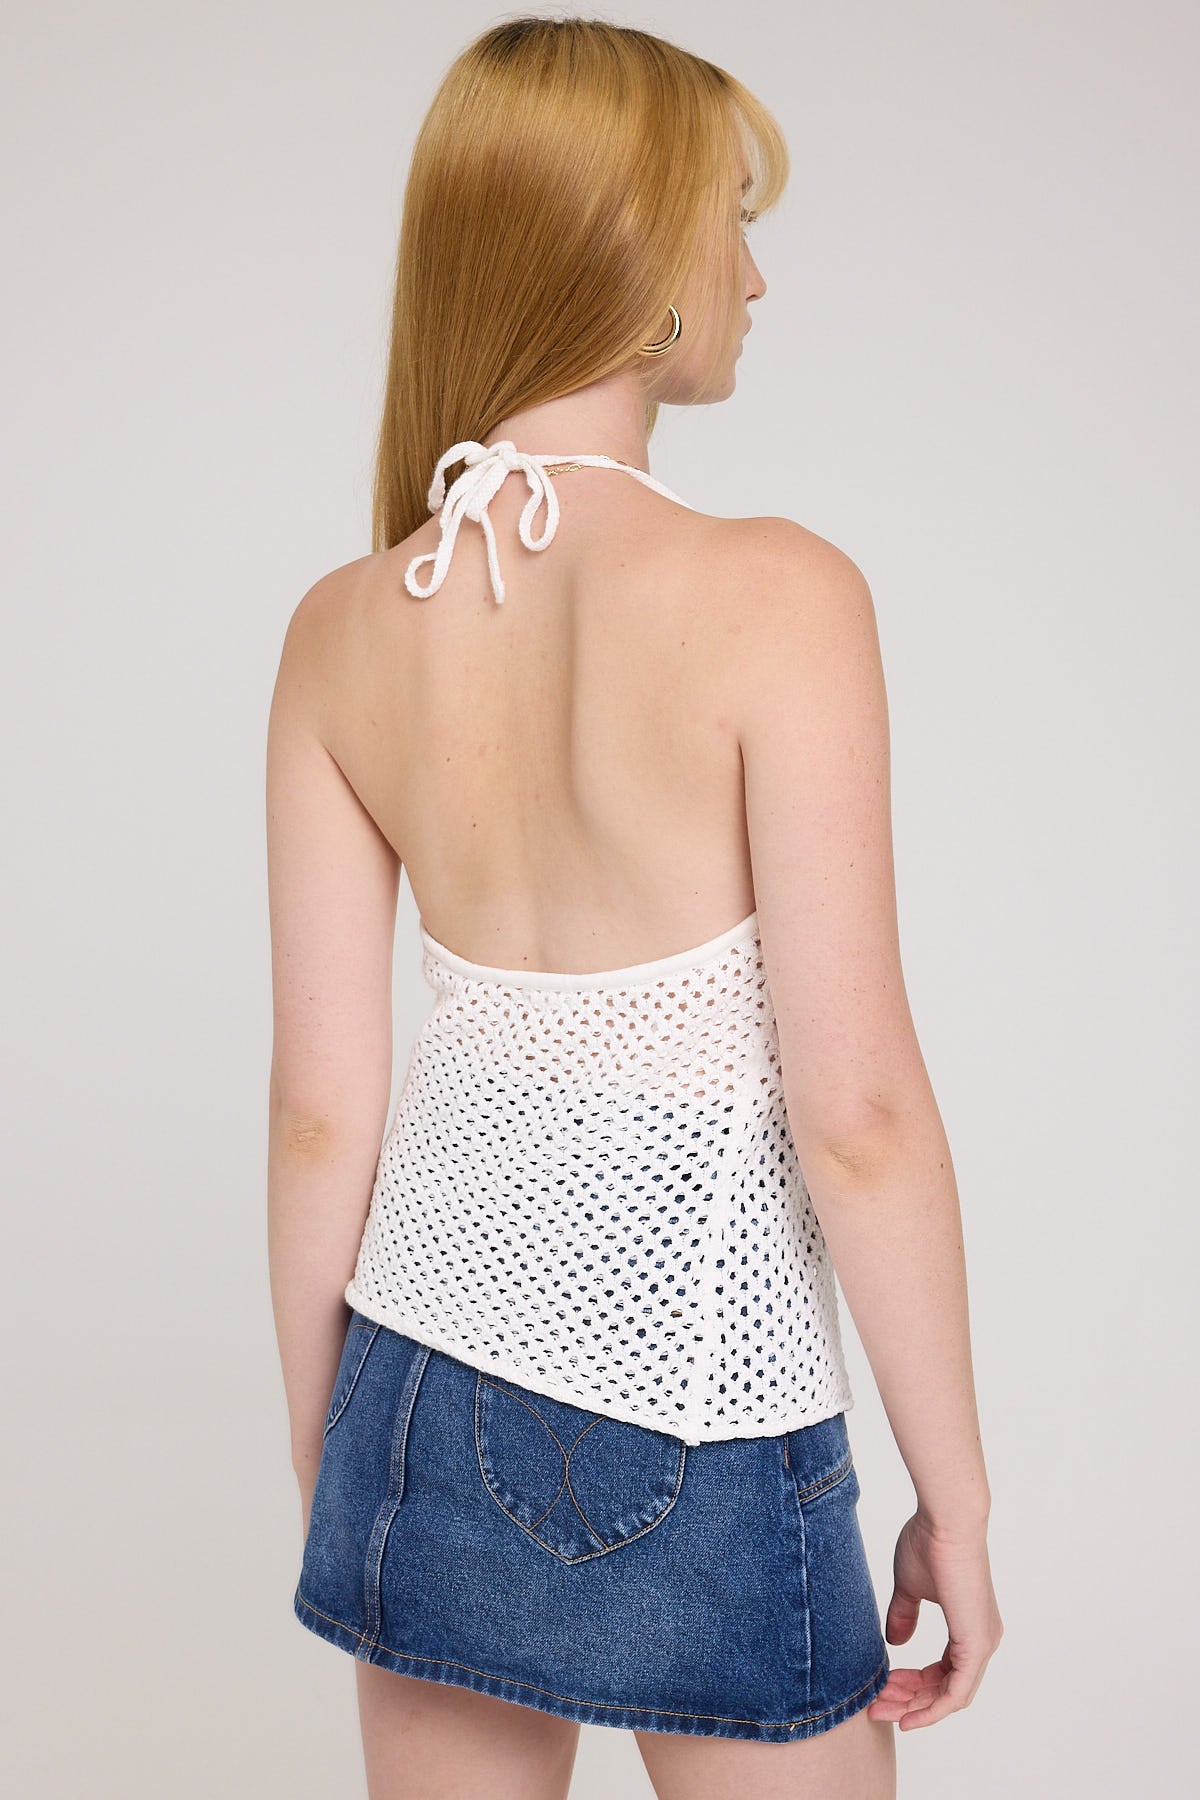 Luck & Trouble Brookie Crochet Tie Front Top White